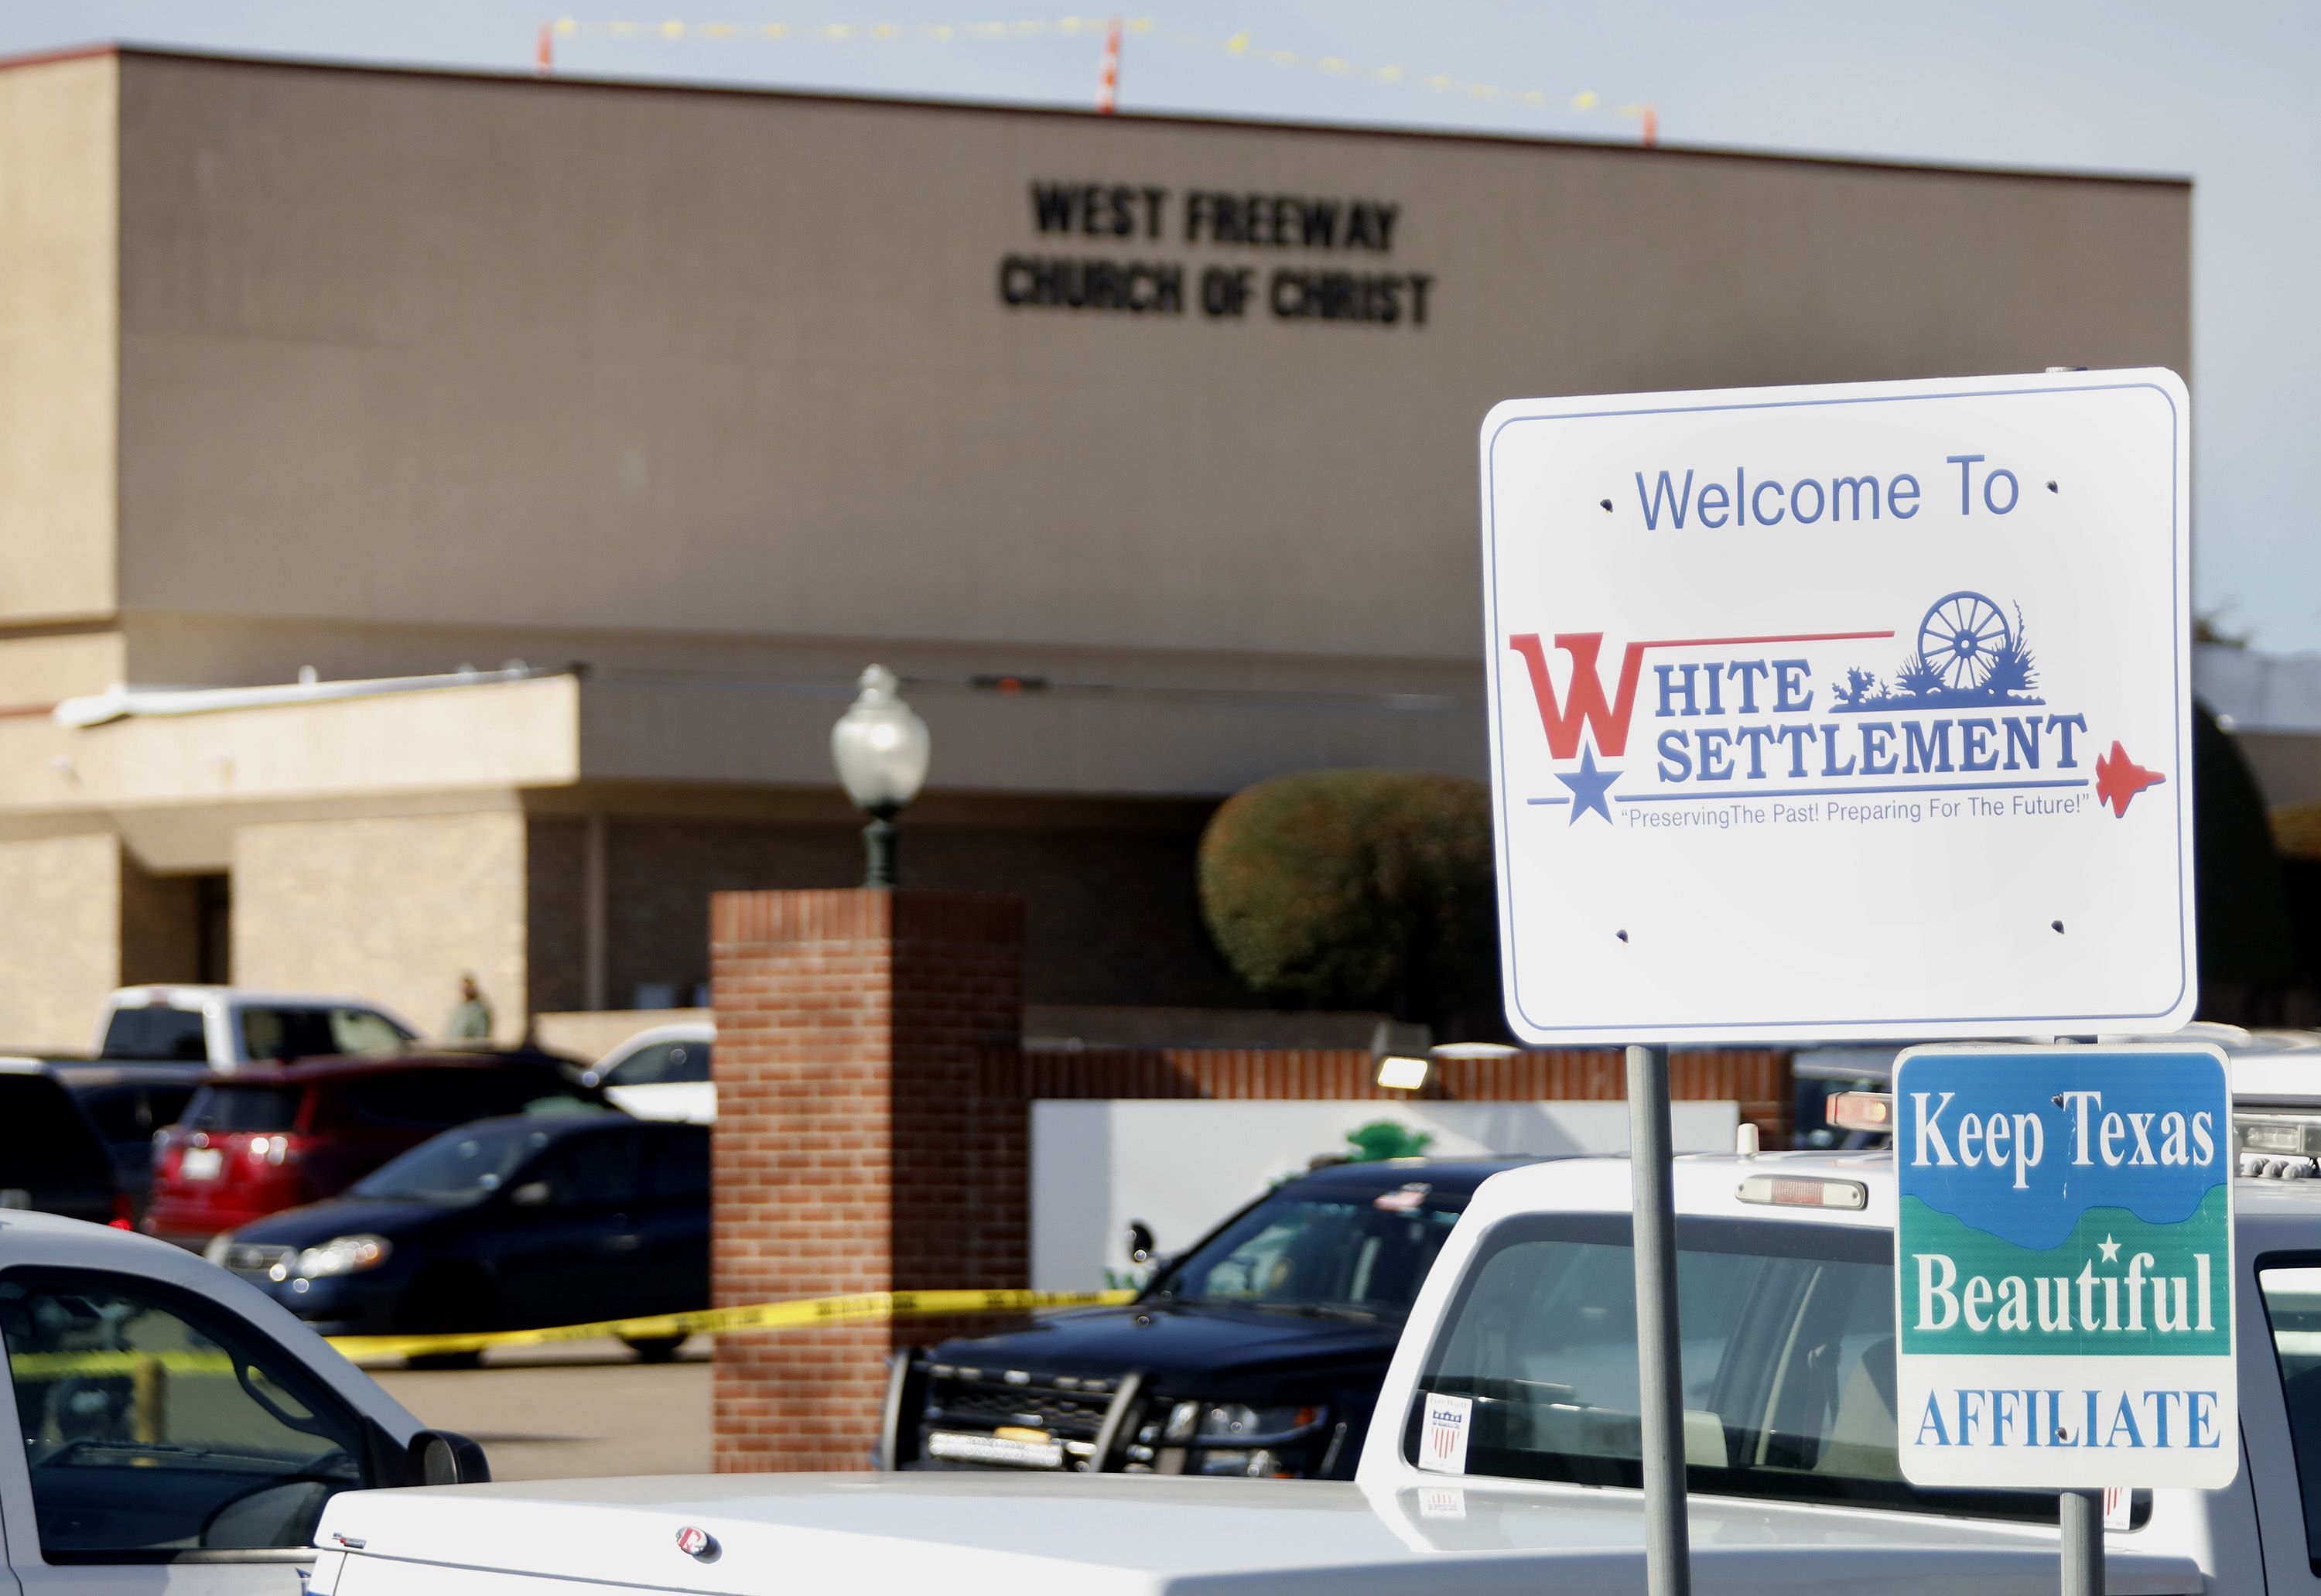 An exterior view of West Freeway Church of Christ where a shooting took place during services on December 29, 2019 in White Settlement, Texas. (AFP Photo)